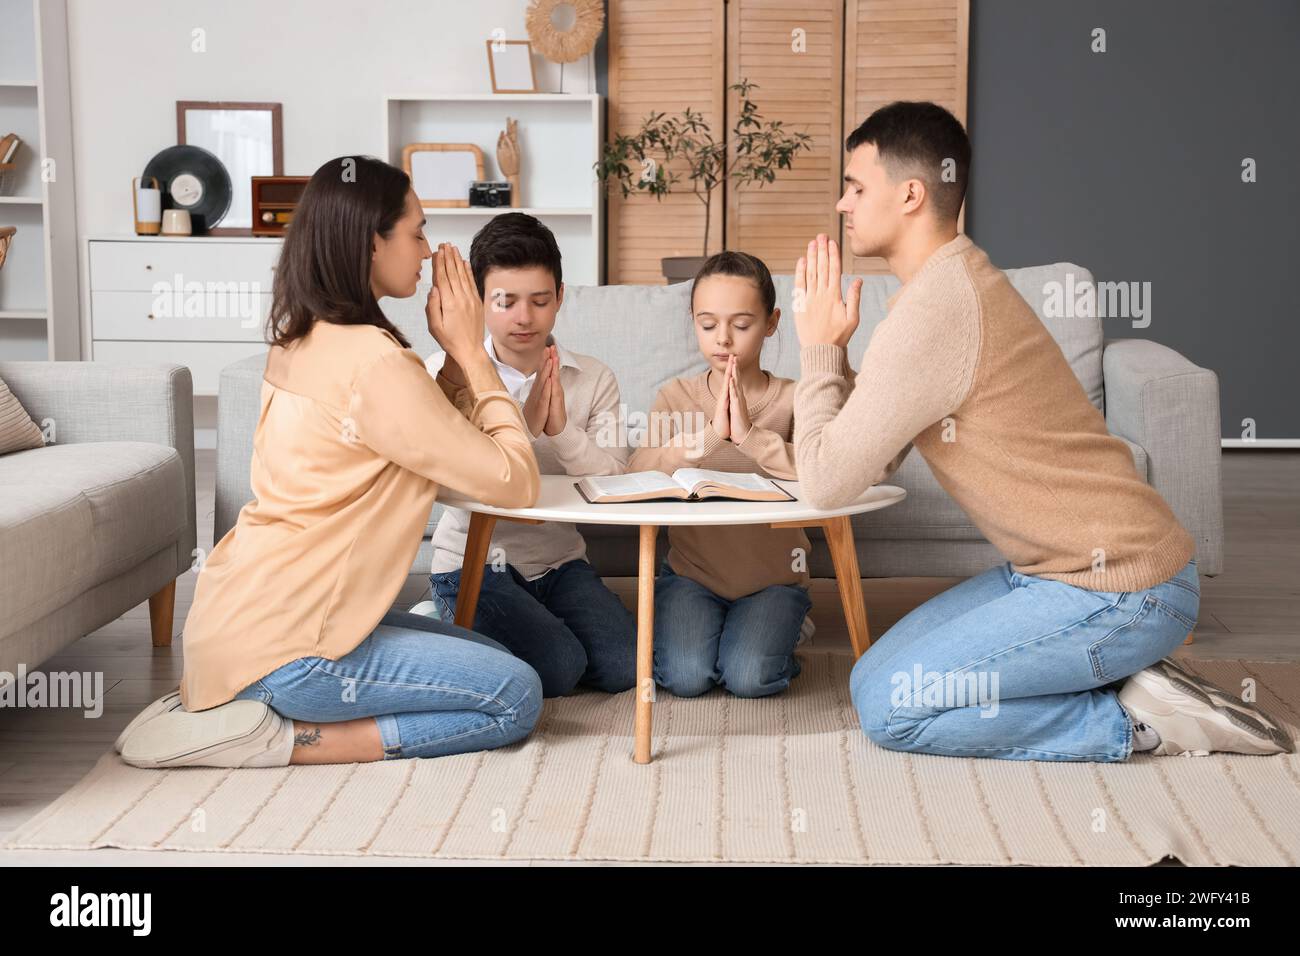 Family praying with Holy Bible on table at home Stock Photo